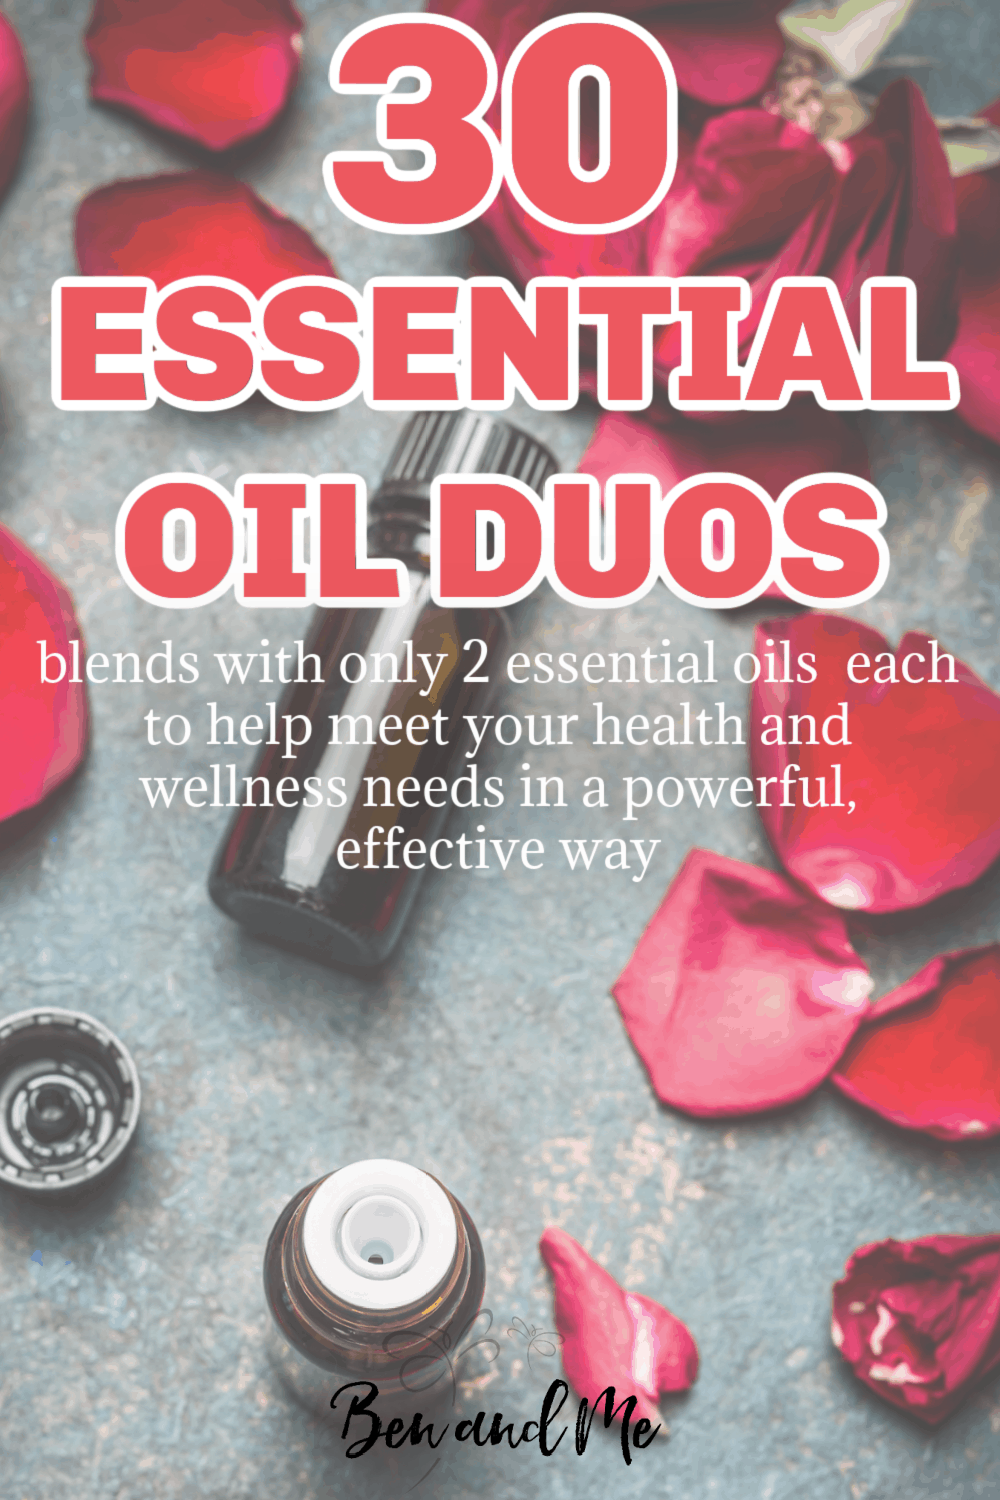 30 essential oil duos - blends with only 2 essential oils each